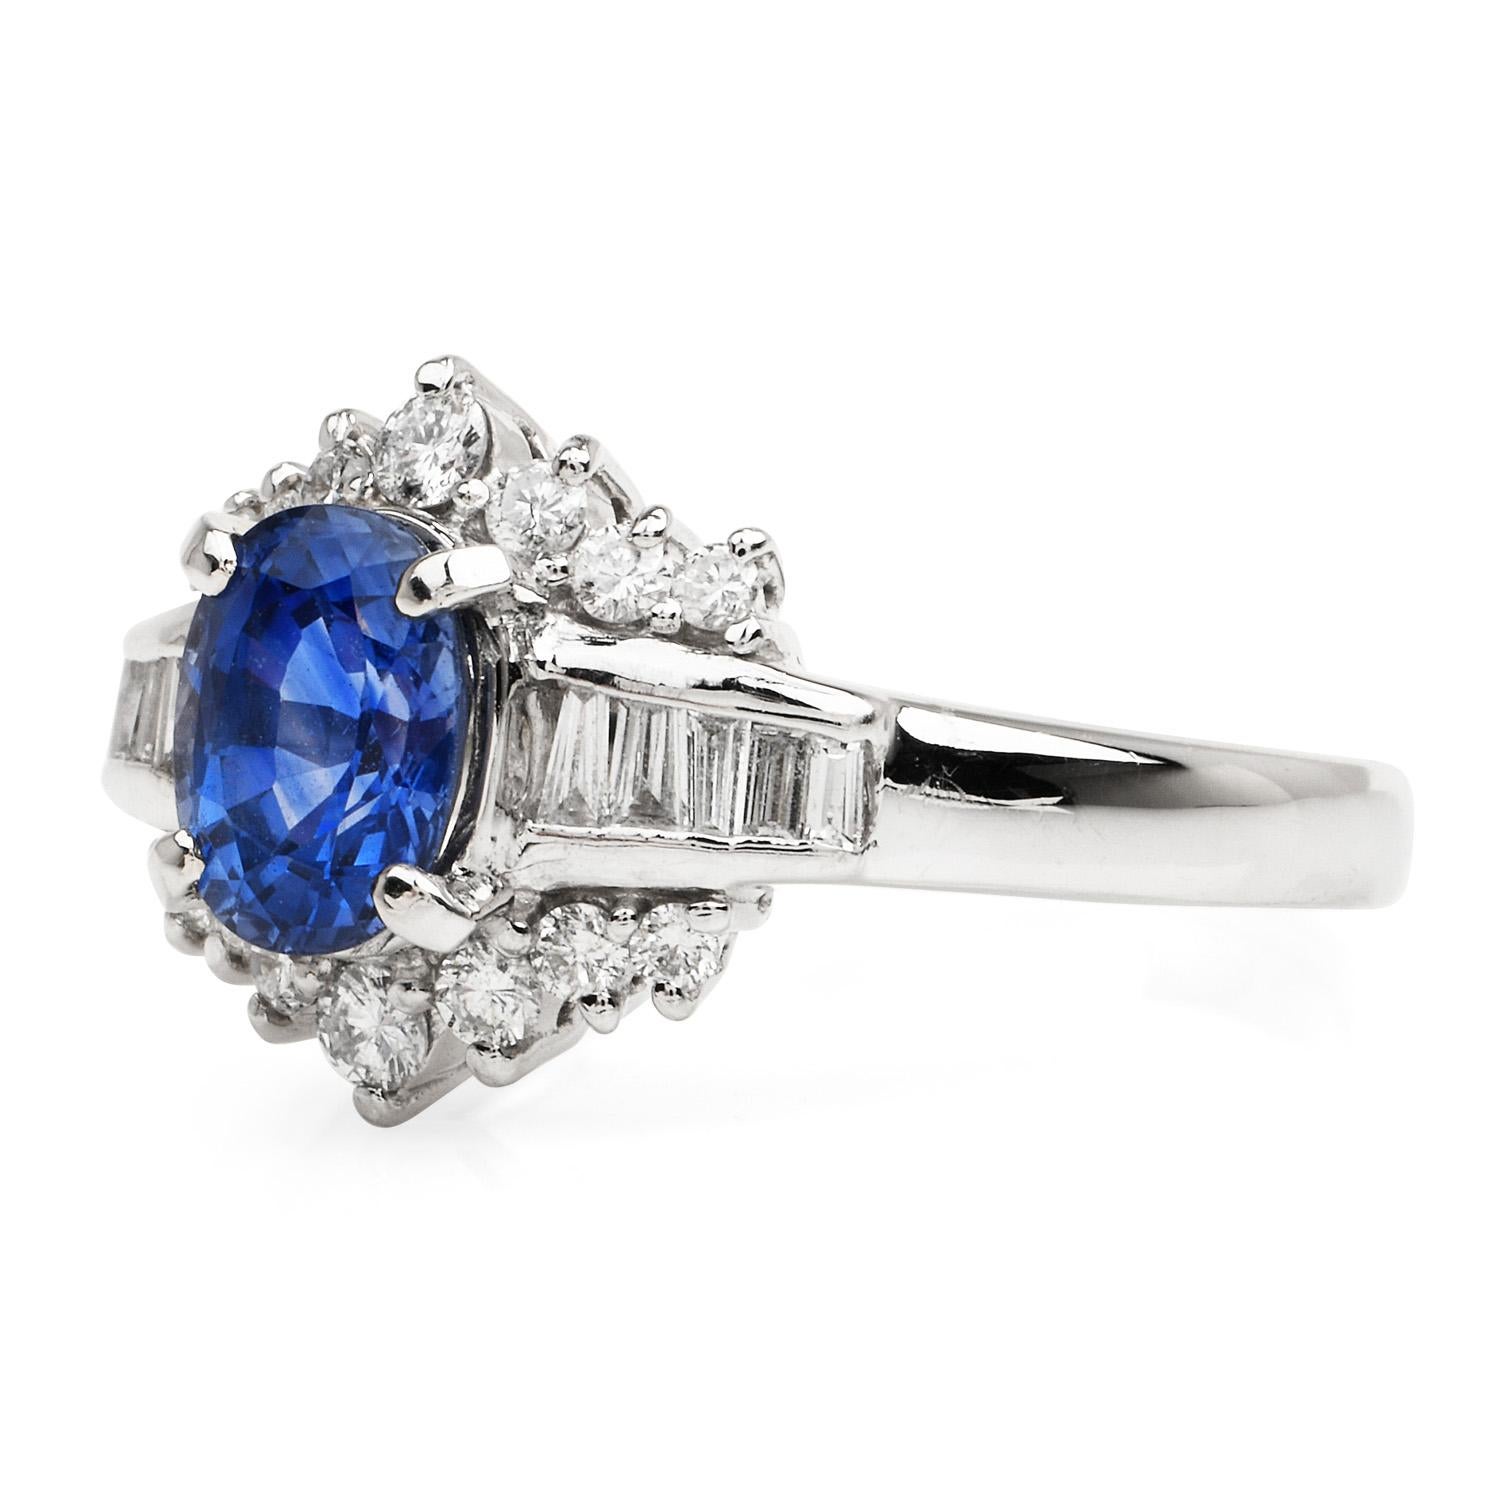 Inspired by a Floral style, Blue Sapphire & Diamond ring is perfect for everyday wearing.

Crafted in solid Platinum, the center is adorned by a Blue Sapphire, oval cut & prong set weighing approximately 1.06 carats. 

Complimenting the sides, there